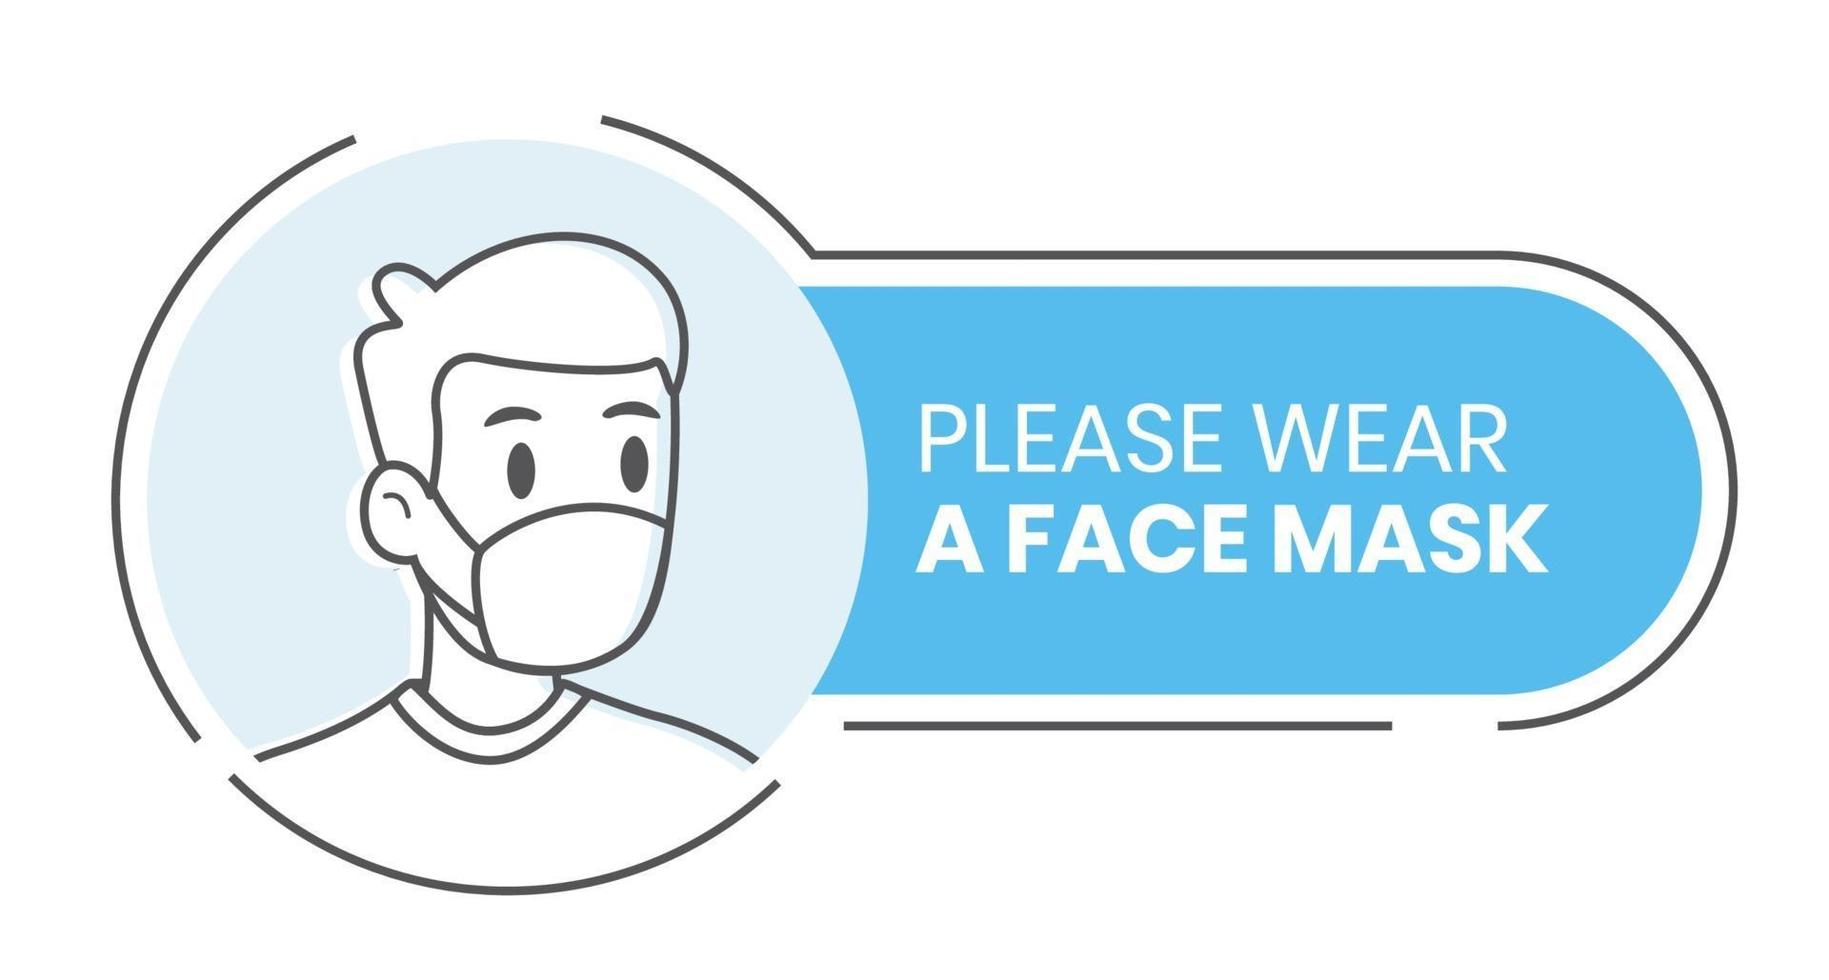 Outline style of man wearing face mask to prevent corona virus vector